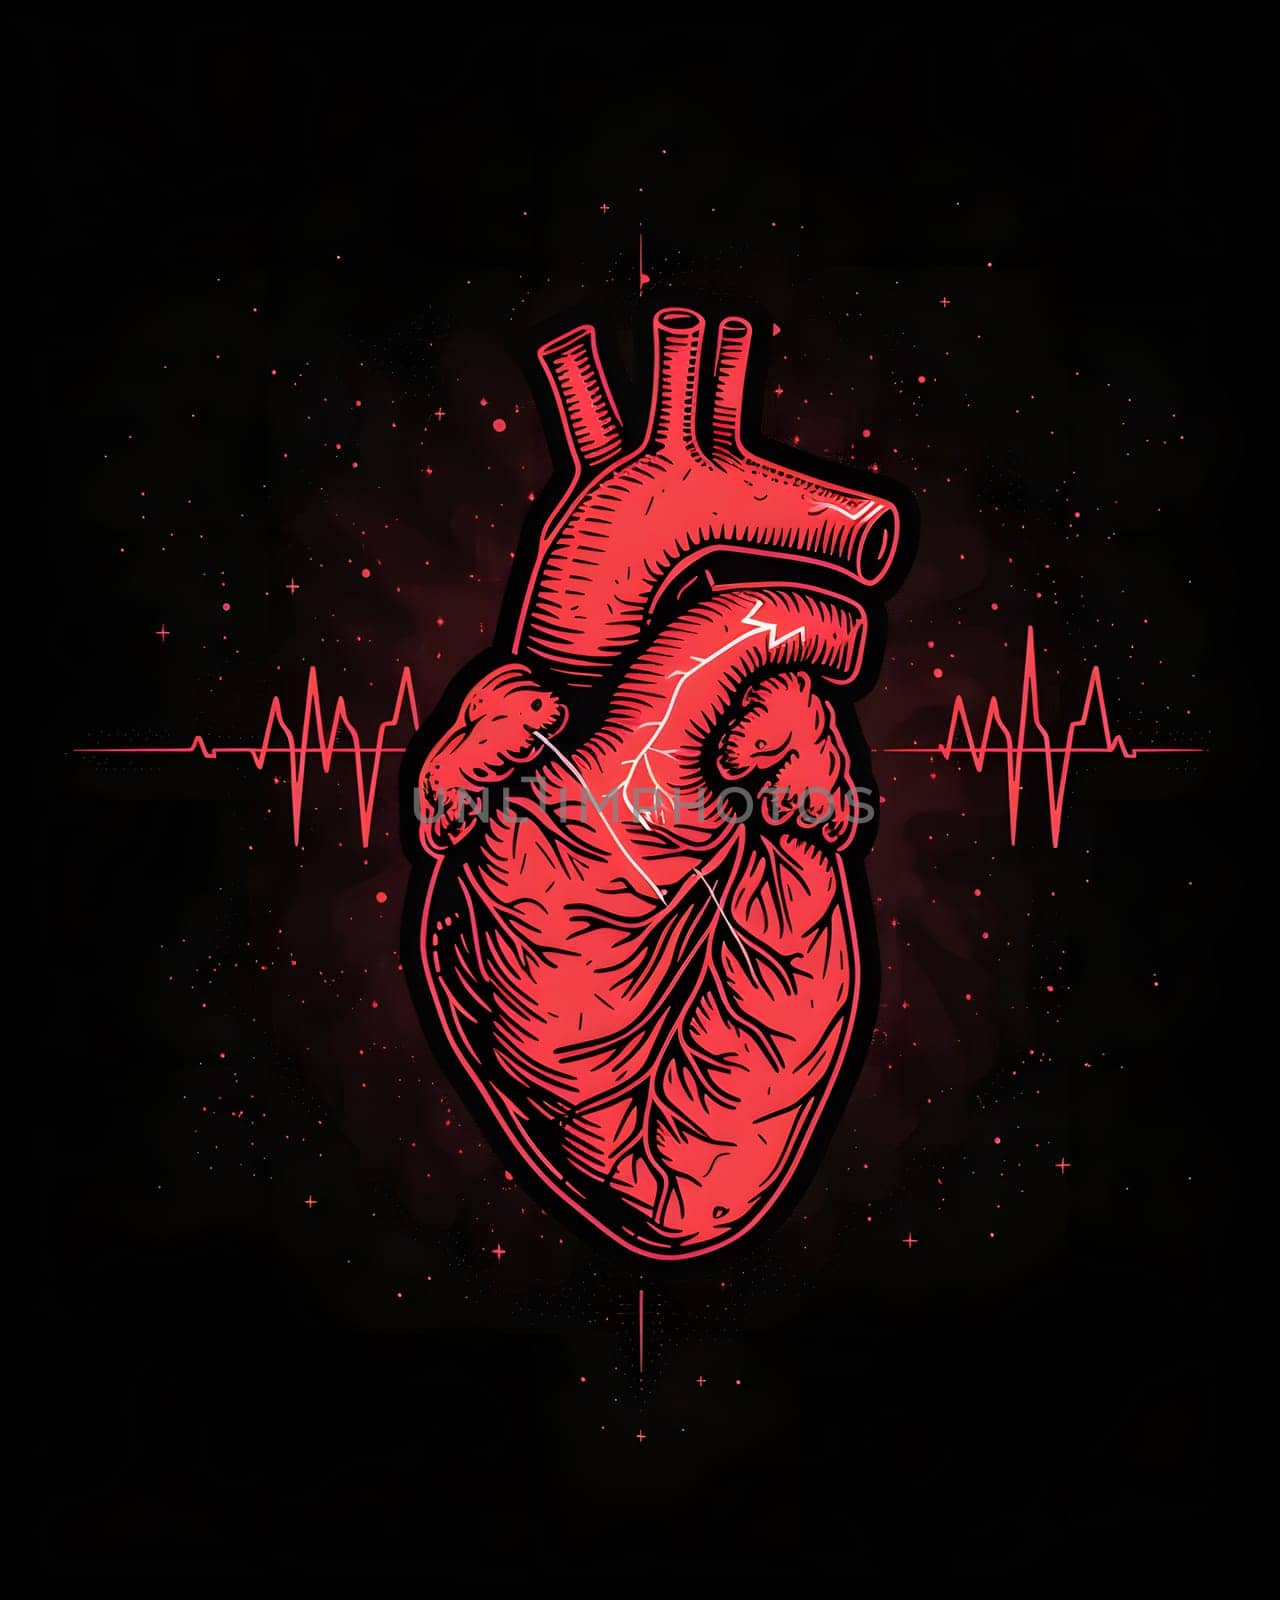 An artistic representation of a human heart with a heartbeat on a dark background, capturing the essence of the bodys life force in a flash of light